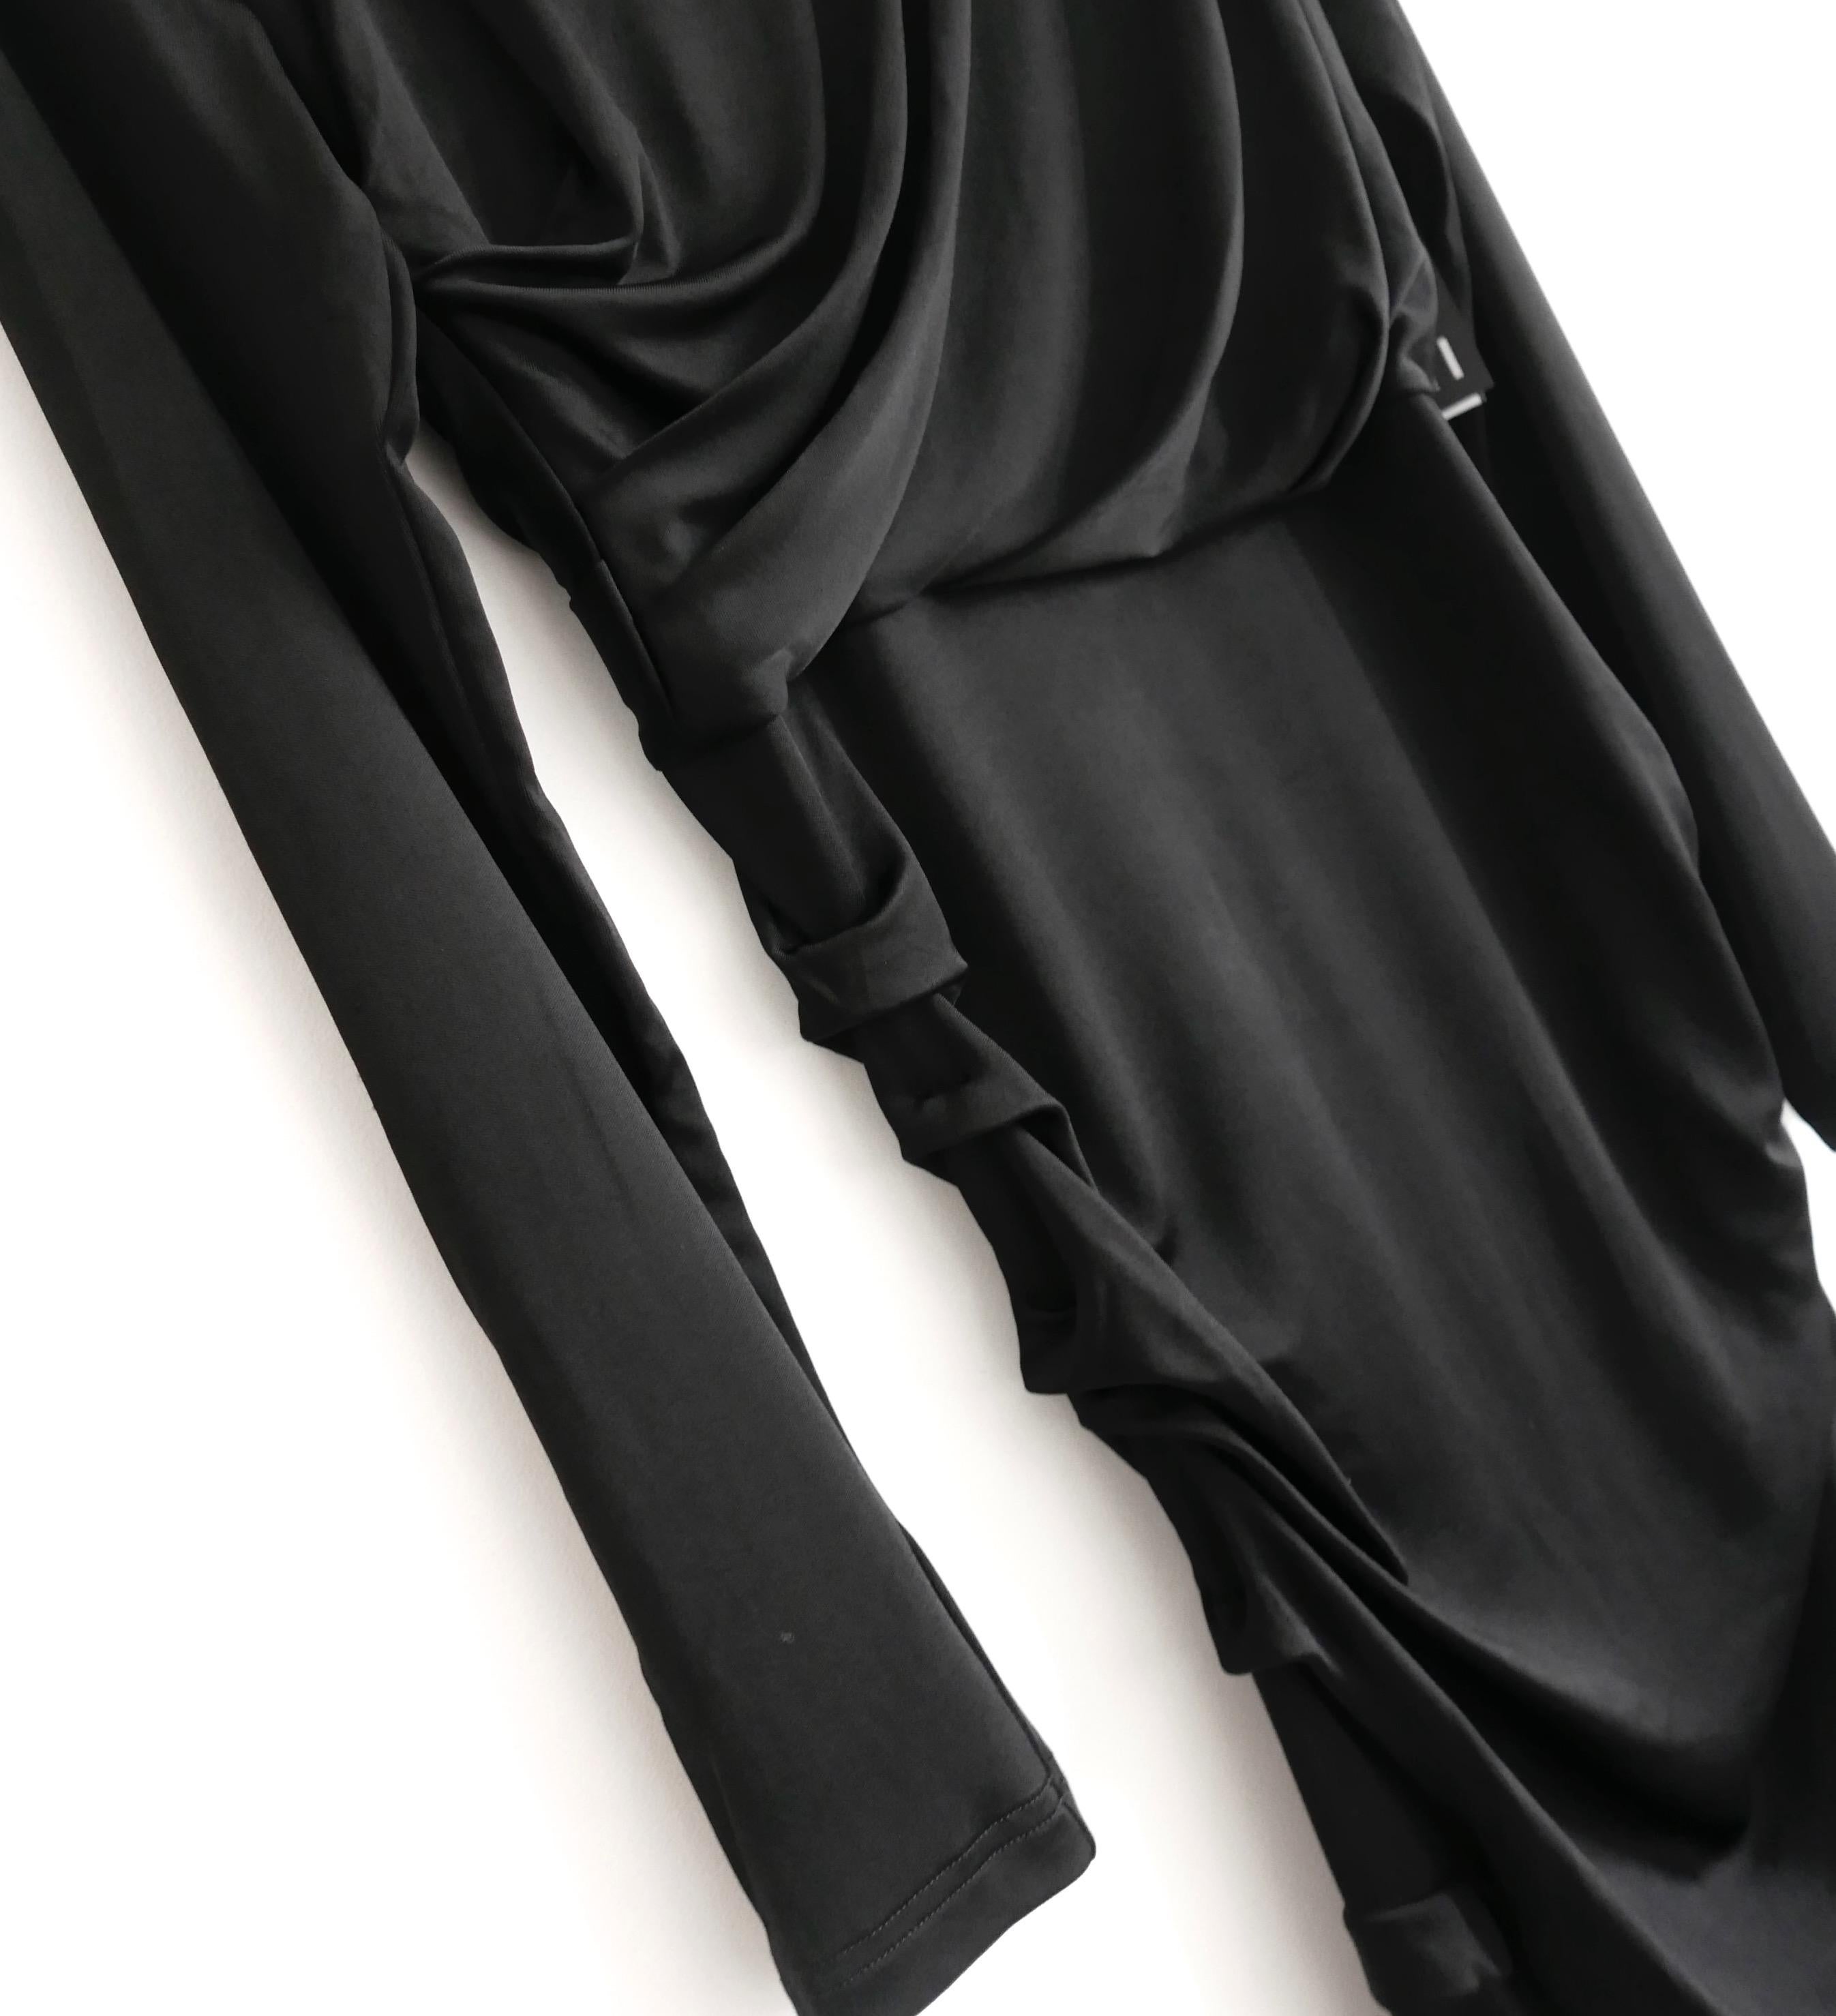 Slinky and timeless Dries Van Noten draped jersey dress. Bought for £795 and new with tags. Made from the softest, most fluid stretchy black viscose and elastane. The cut is the epitome of easy elegance with superbly placed soft draping, long